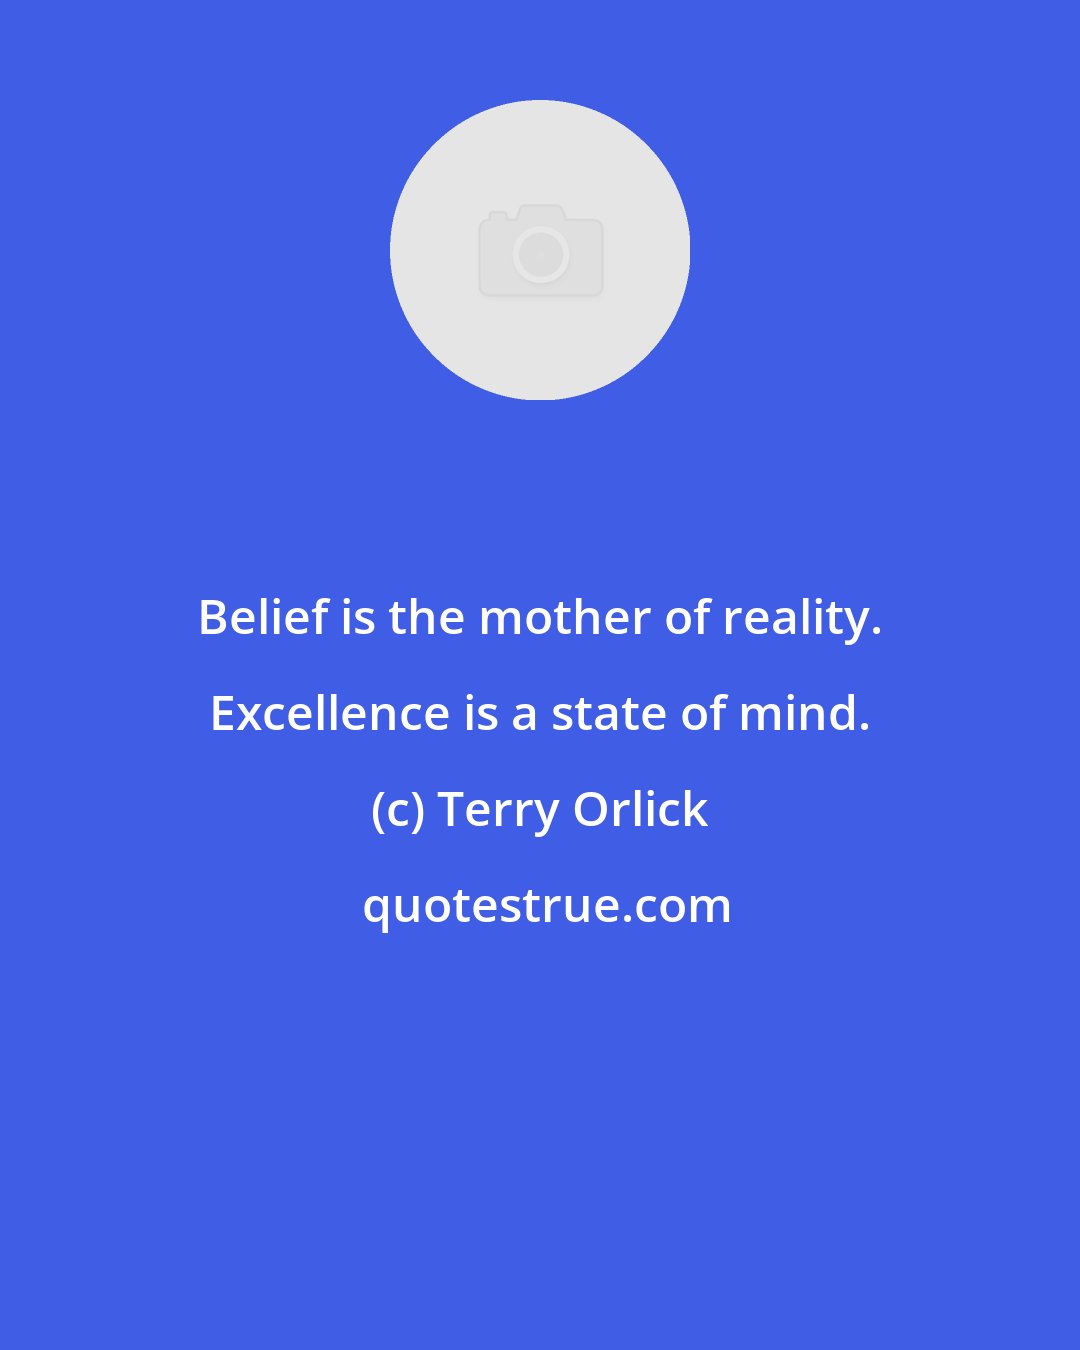 Terry Orlick: Belief is the mother of reality. Excellence is a state of mind.